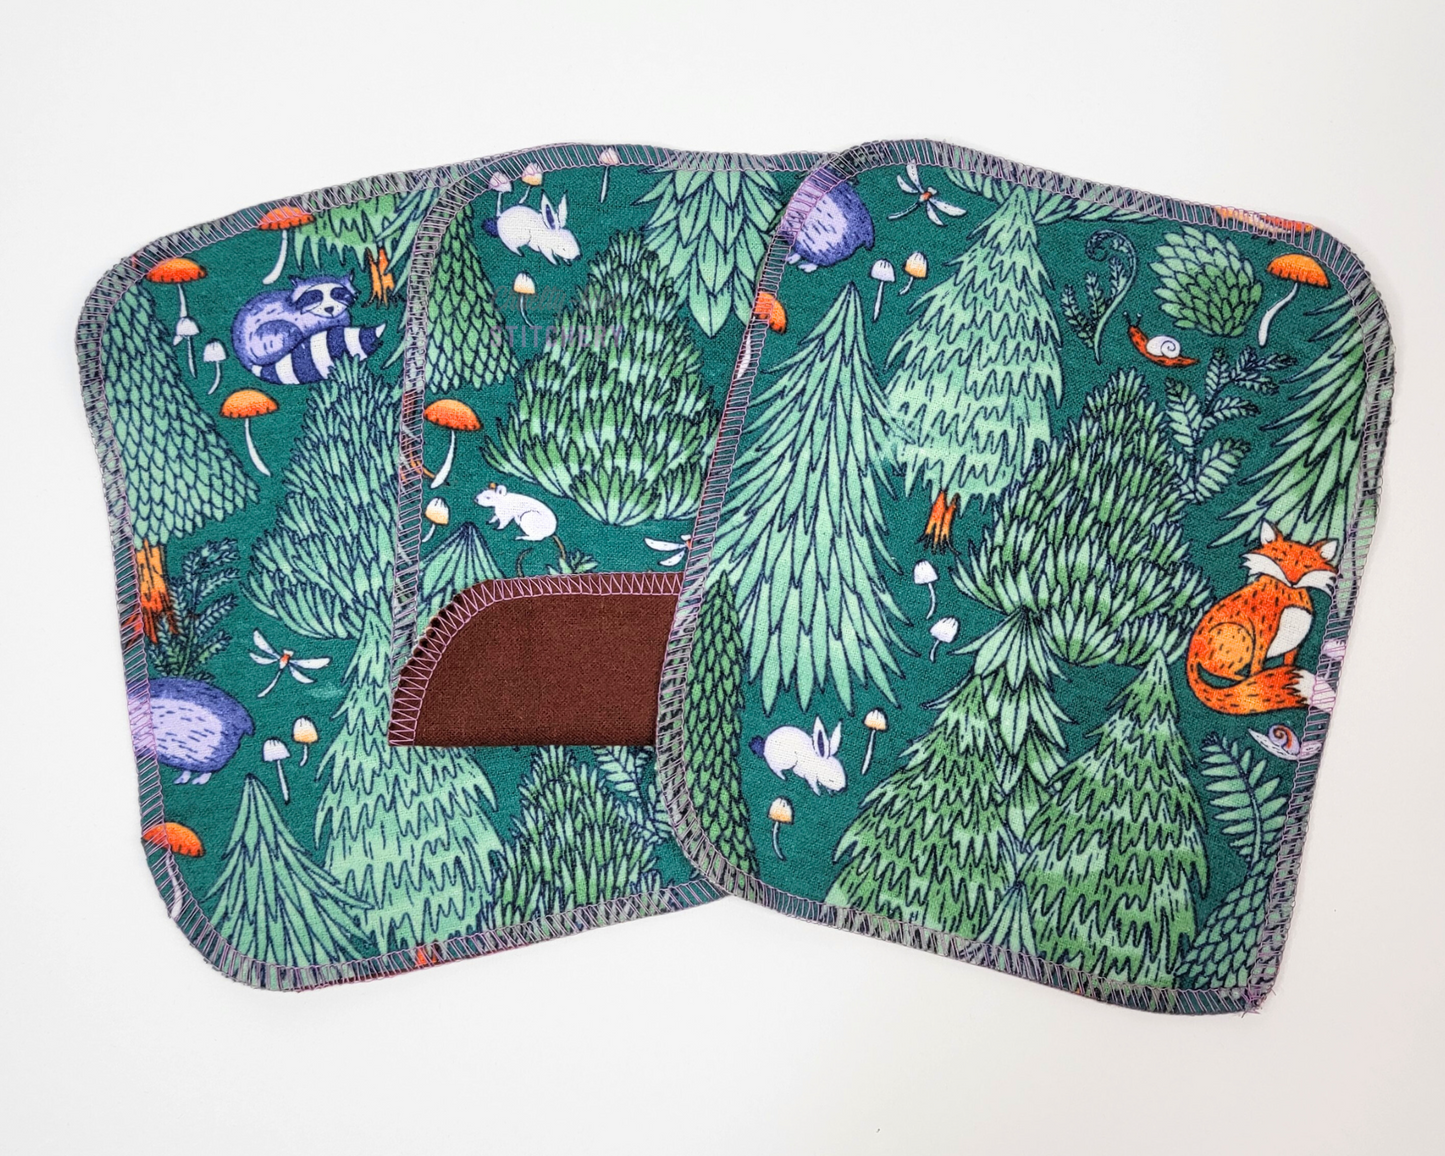 Three reusable cloth wipes in the woodland print. They are a dark green with printed trees, mushrooms, and animals like foxes, raccoons, rabbits, etc. The one in the center is folded up to show that the back side is dark brown.